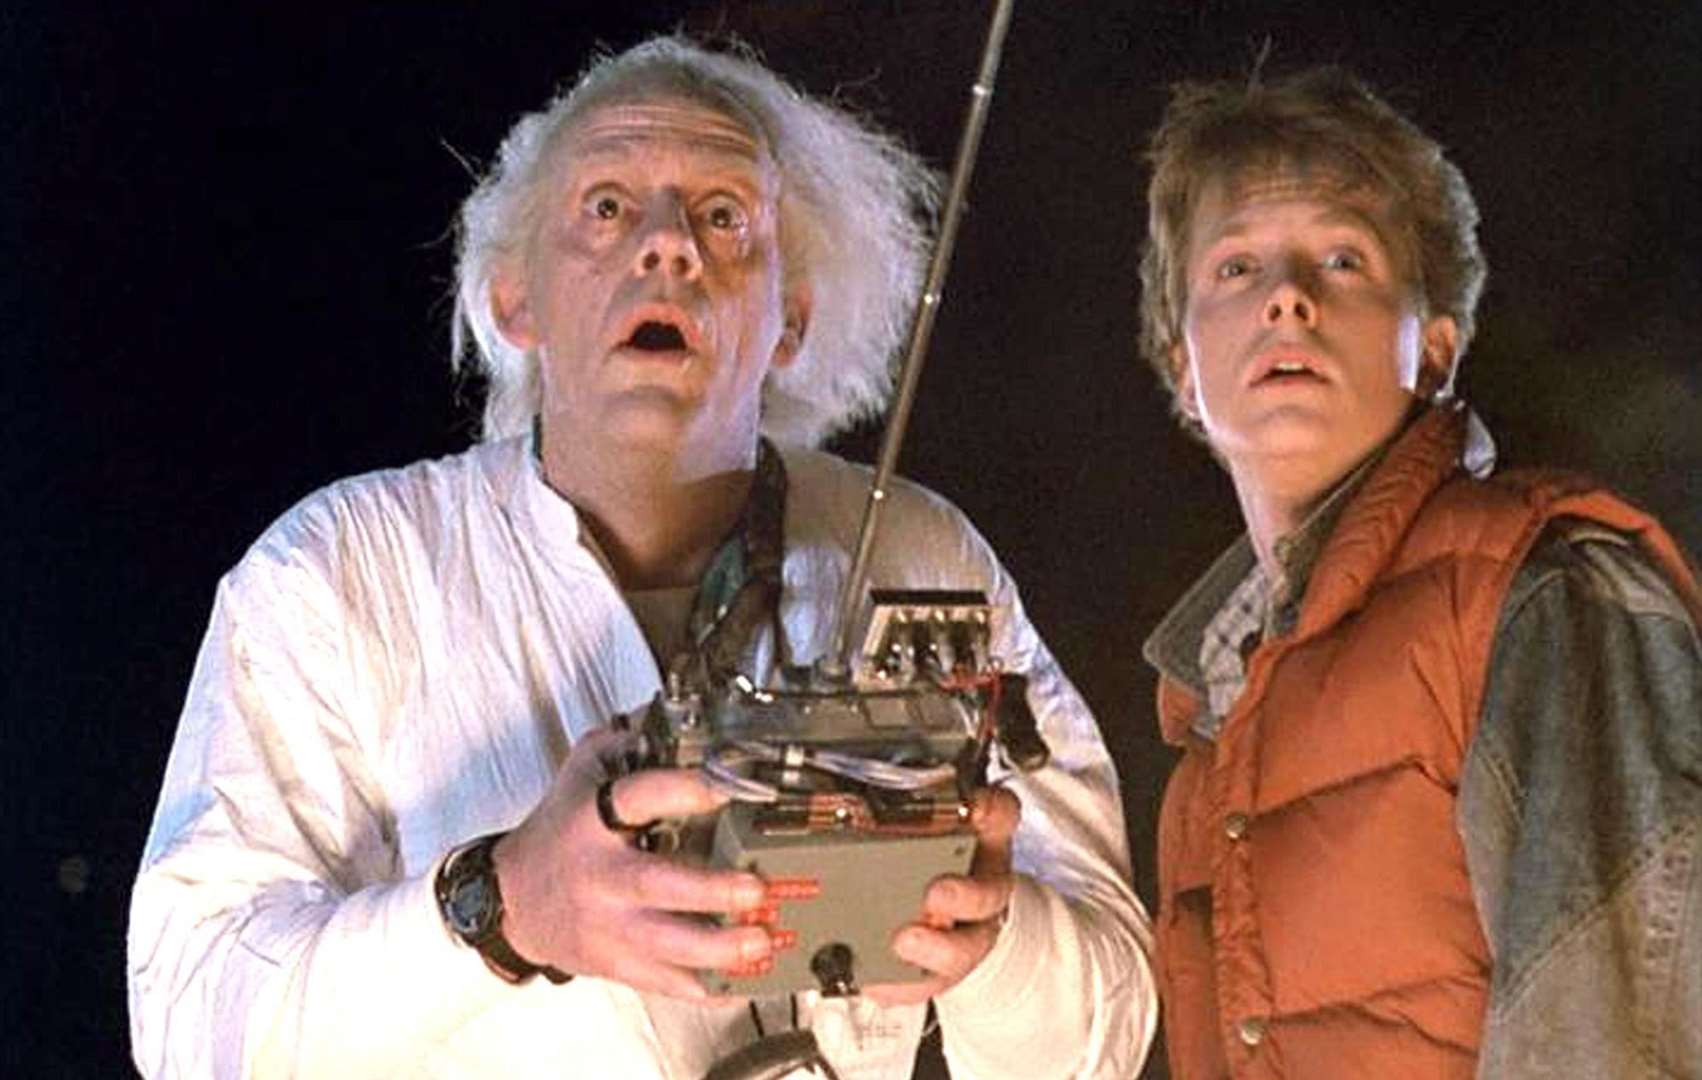 Back to the Future will be screened